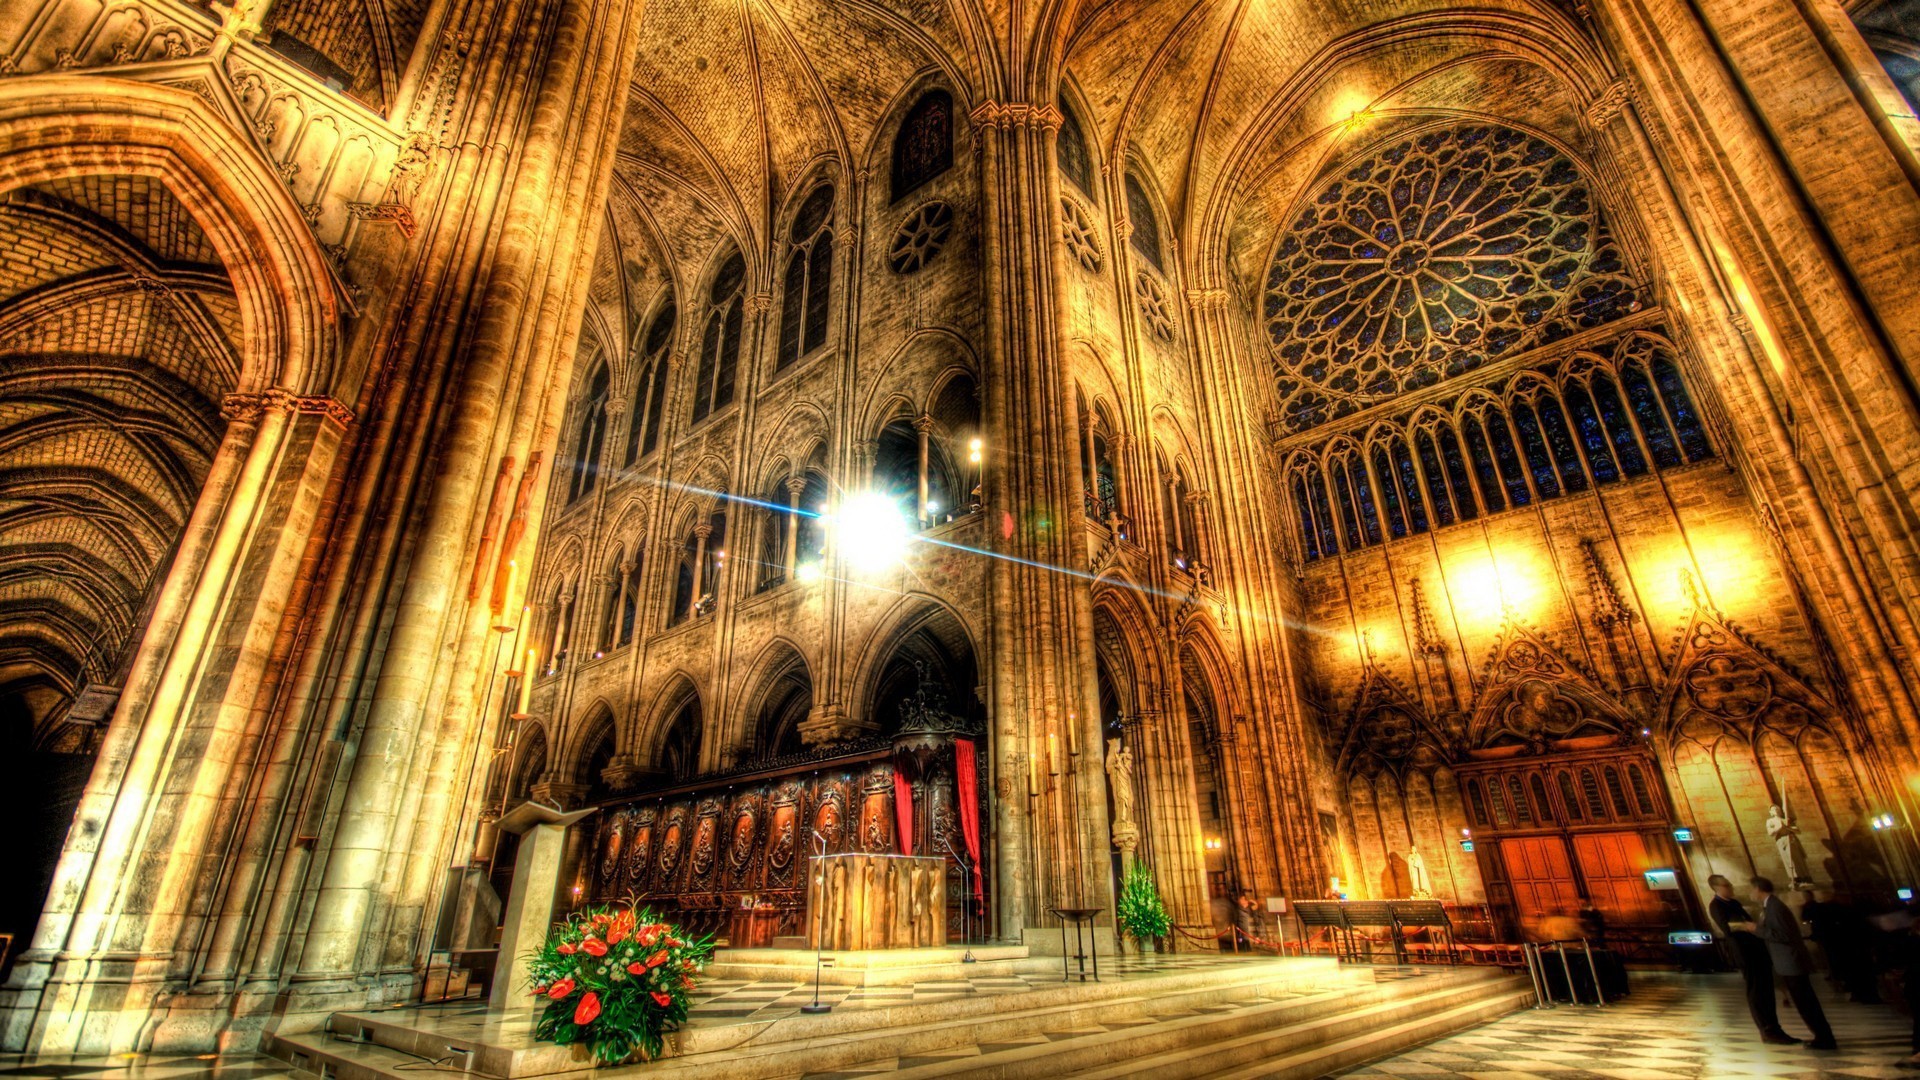 Cathedral Hd Wallpapers - Inside Notre Dame - HD Wallpaper 